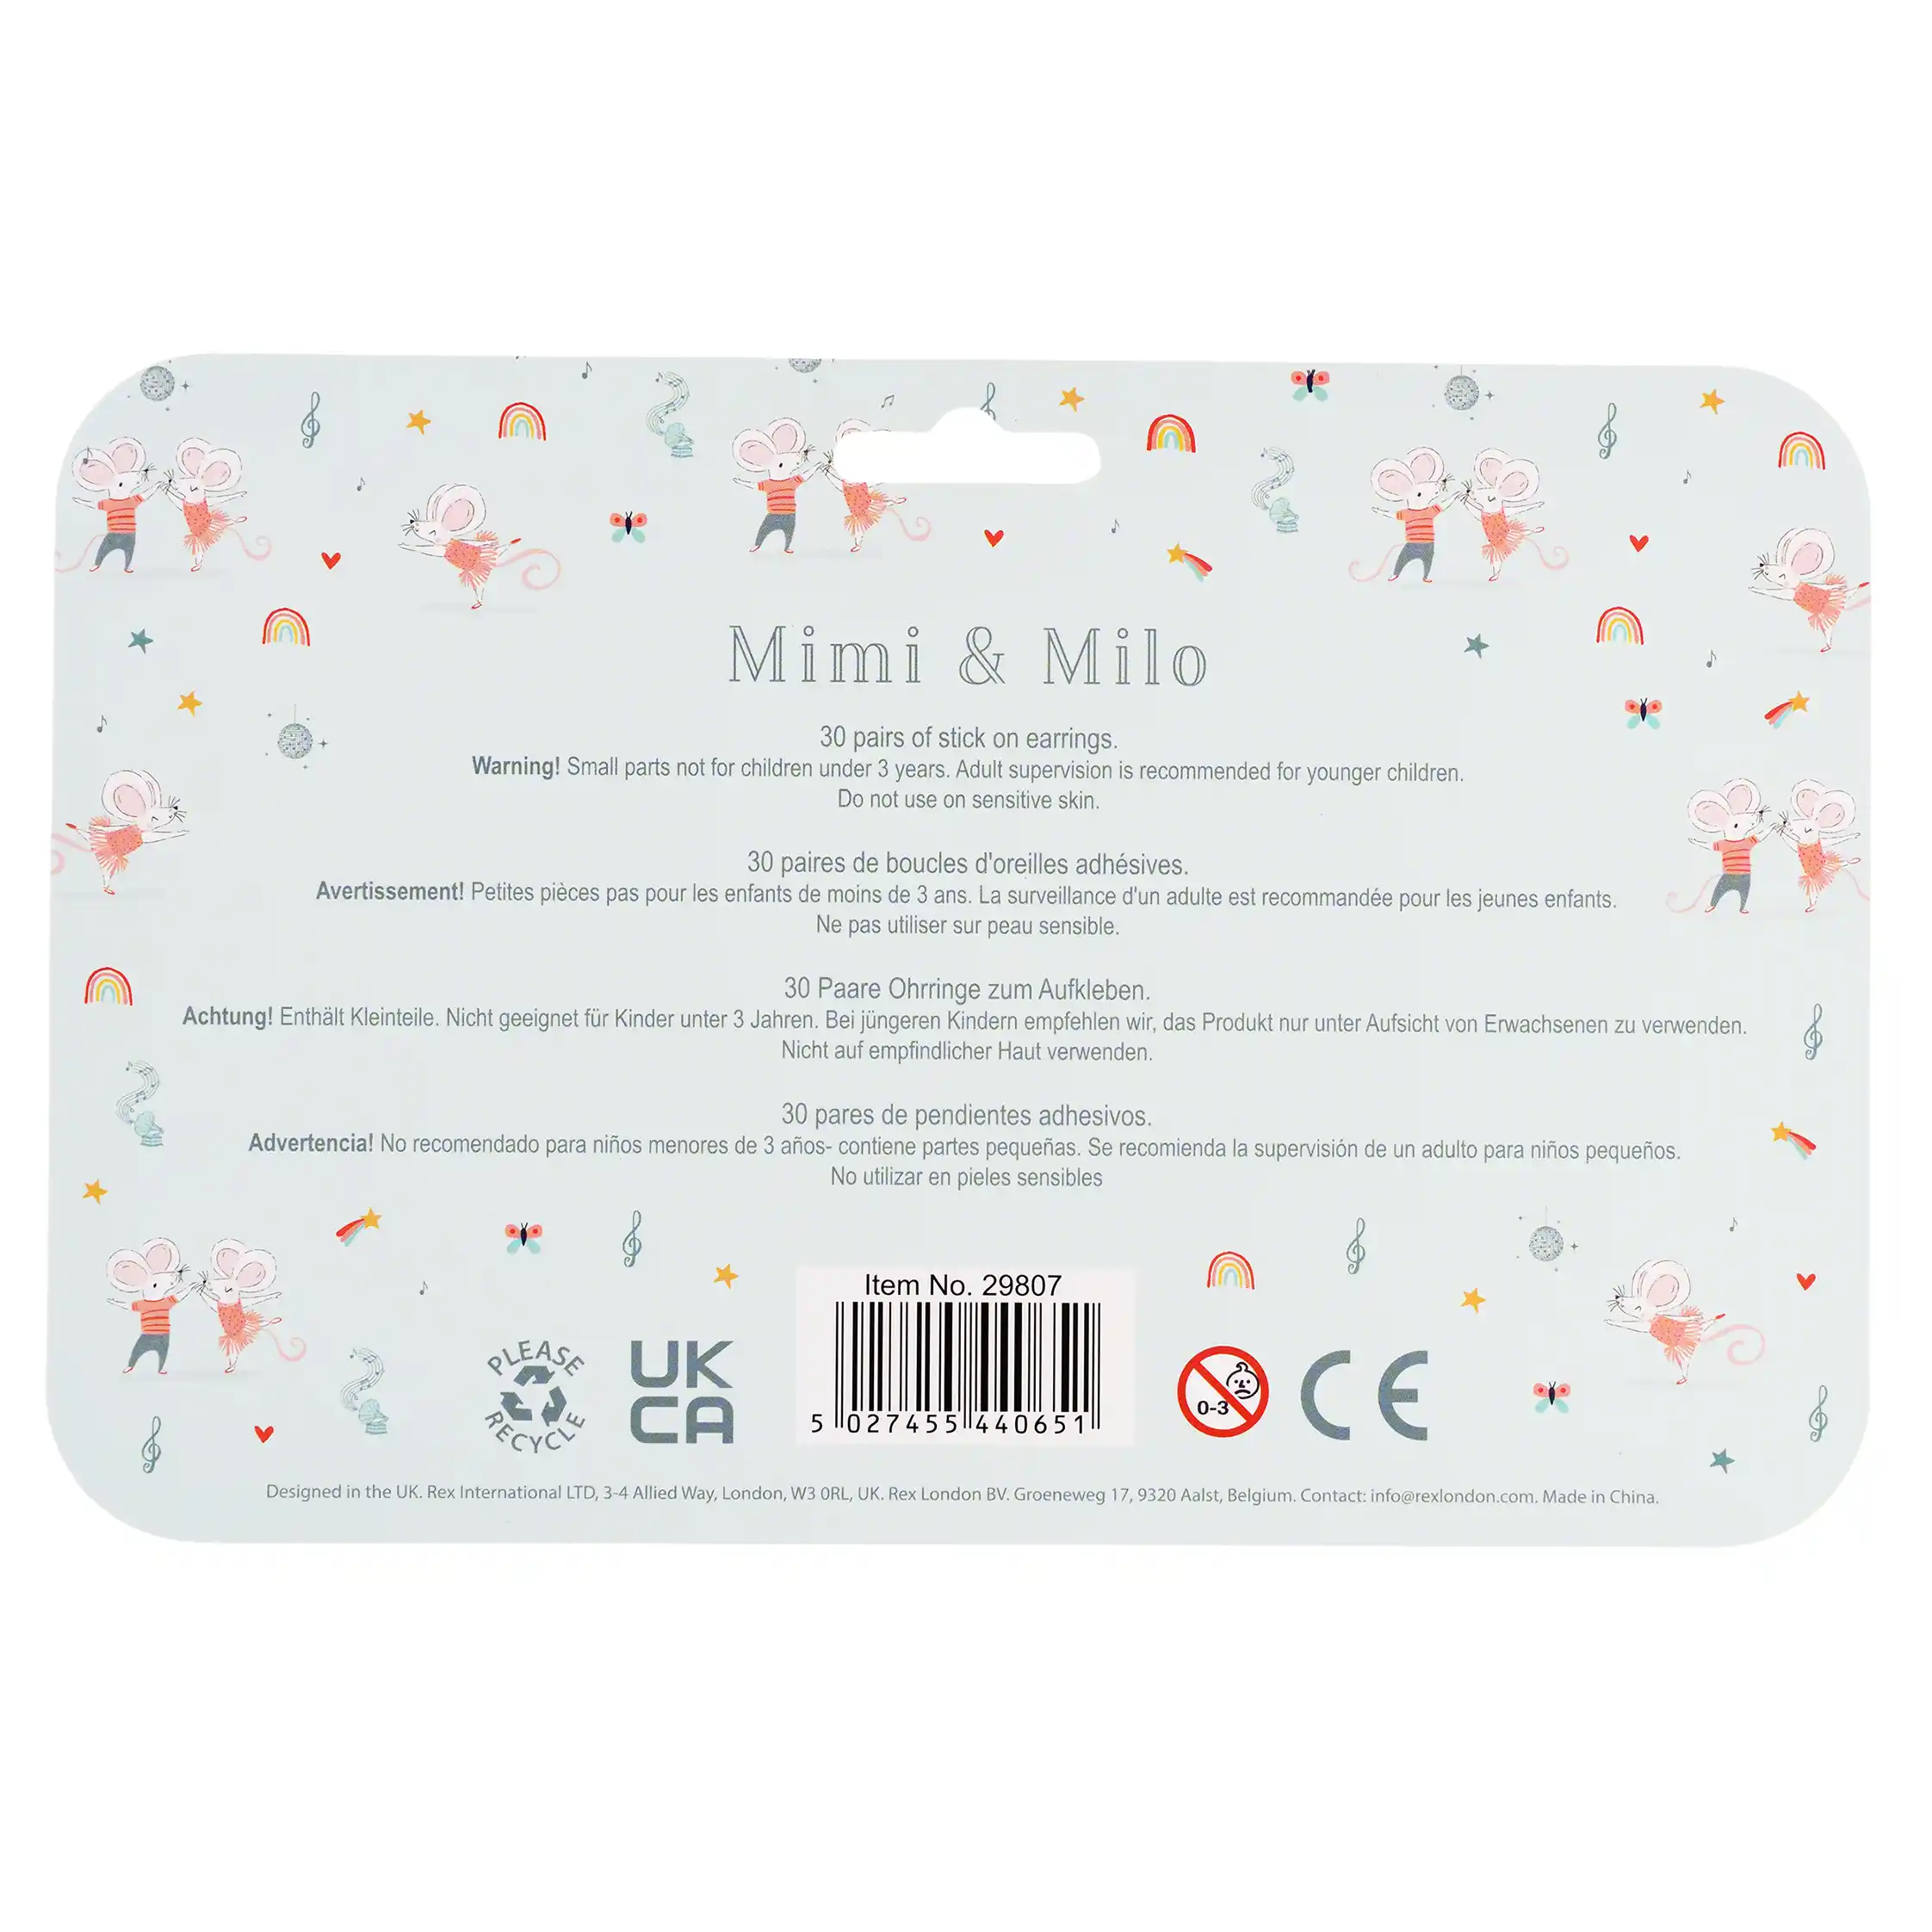 stick on earrings (30 pairs) - mimi and milo